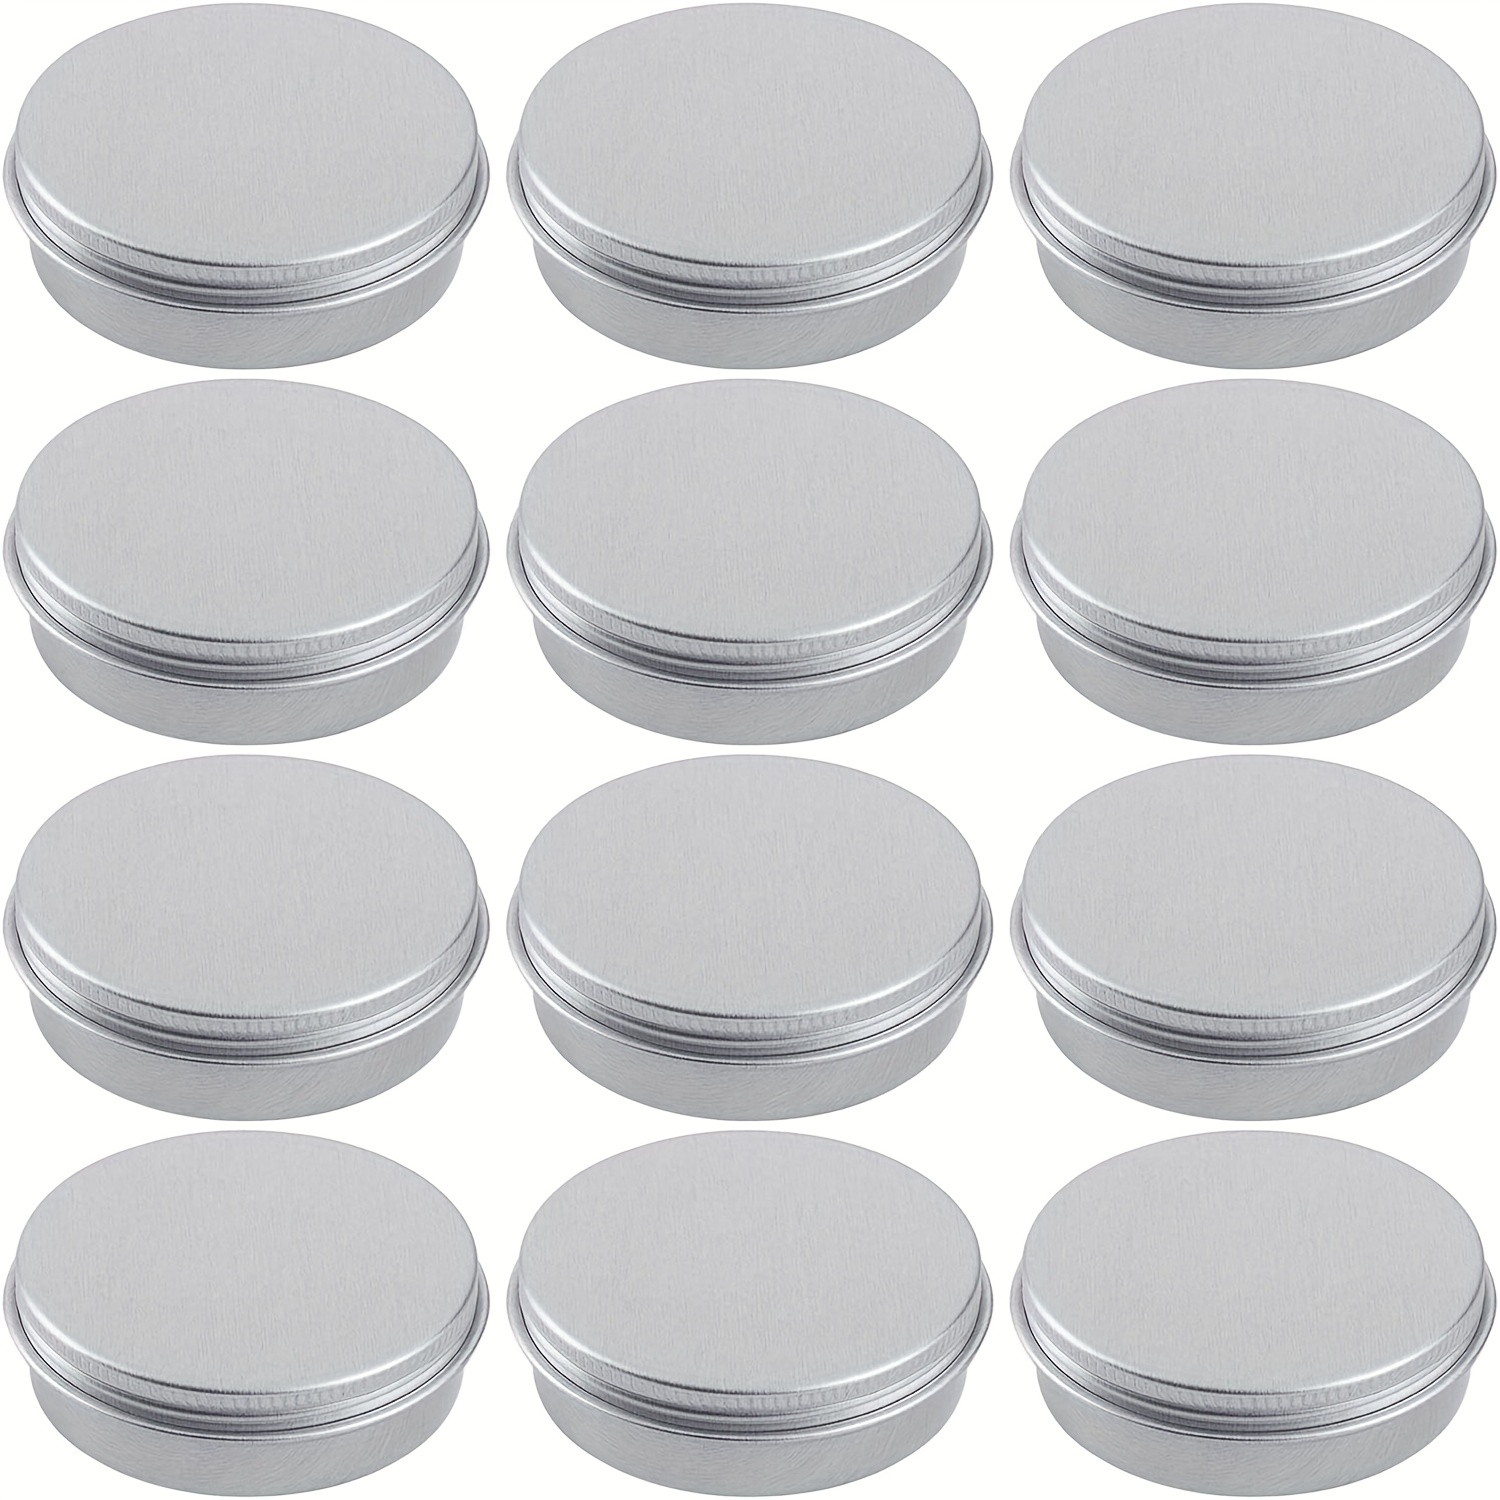 3/6 Pcs 1.35oz Aluminum Tin Jar, Round Metal Tins With Lids, Aluminum  Cosmetic Sample Containers With Screw Lid For Candle, Lip Balm,salve,eye  Shadow, Check Out Today's Deals Now